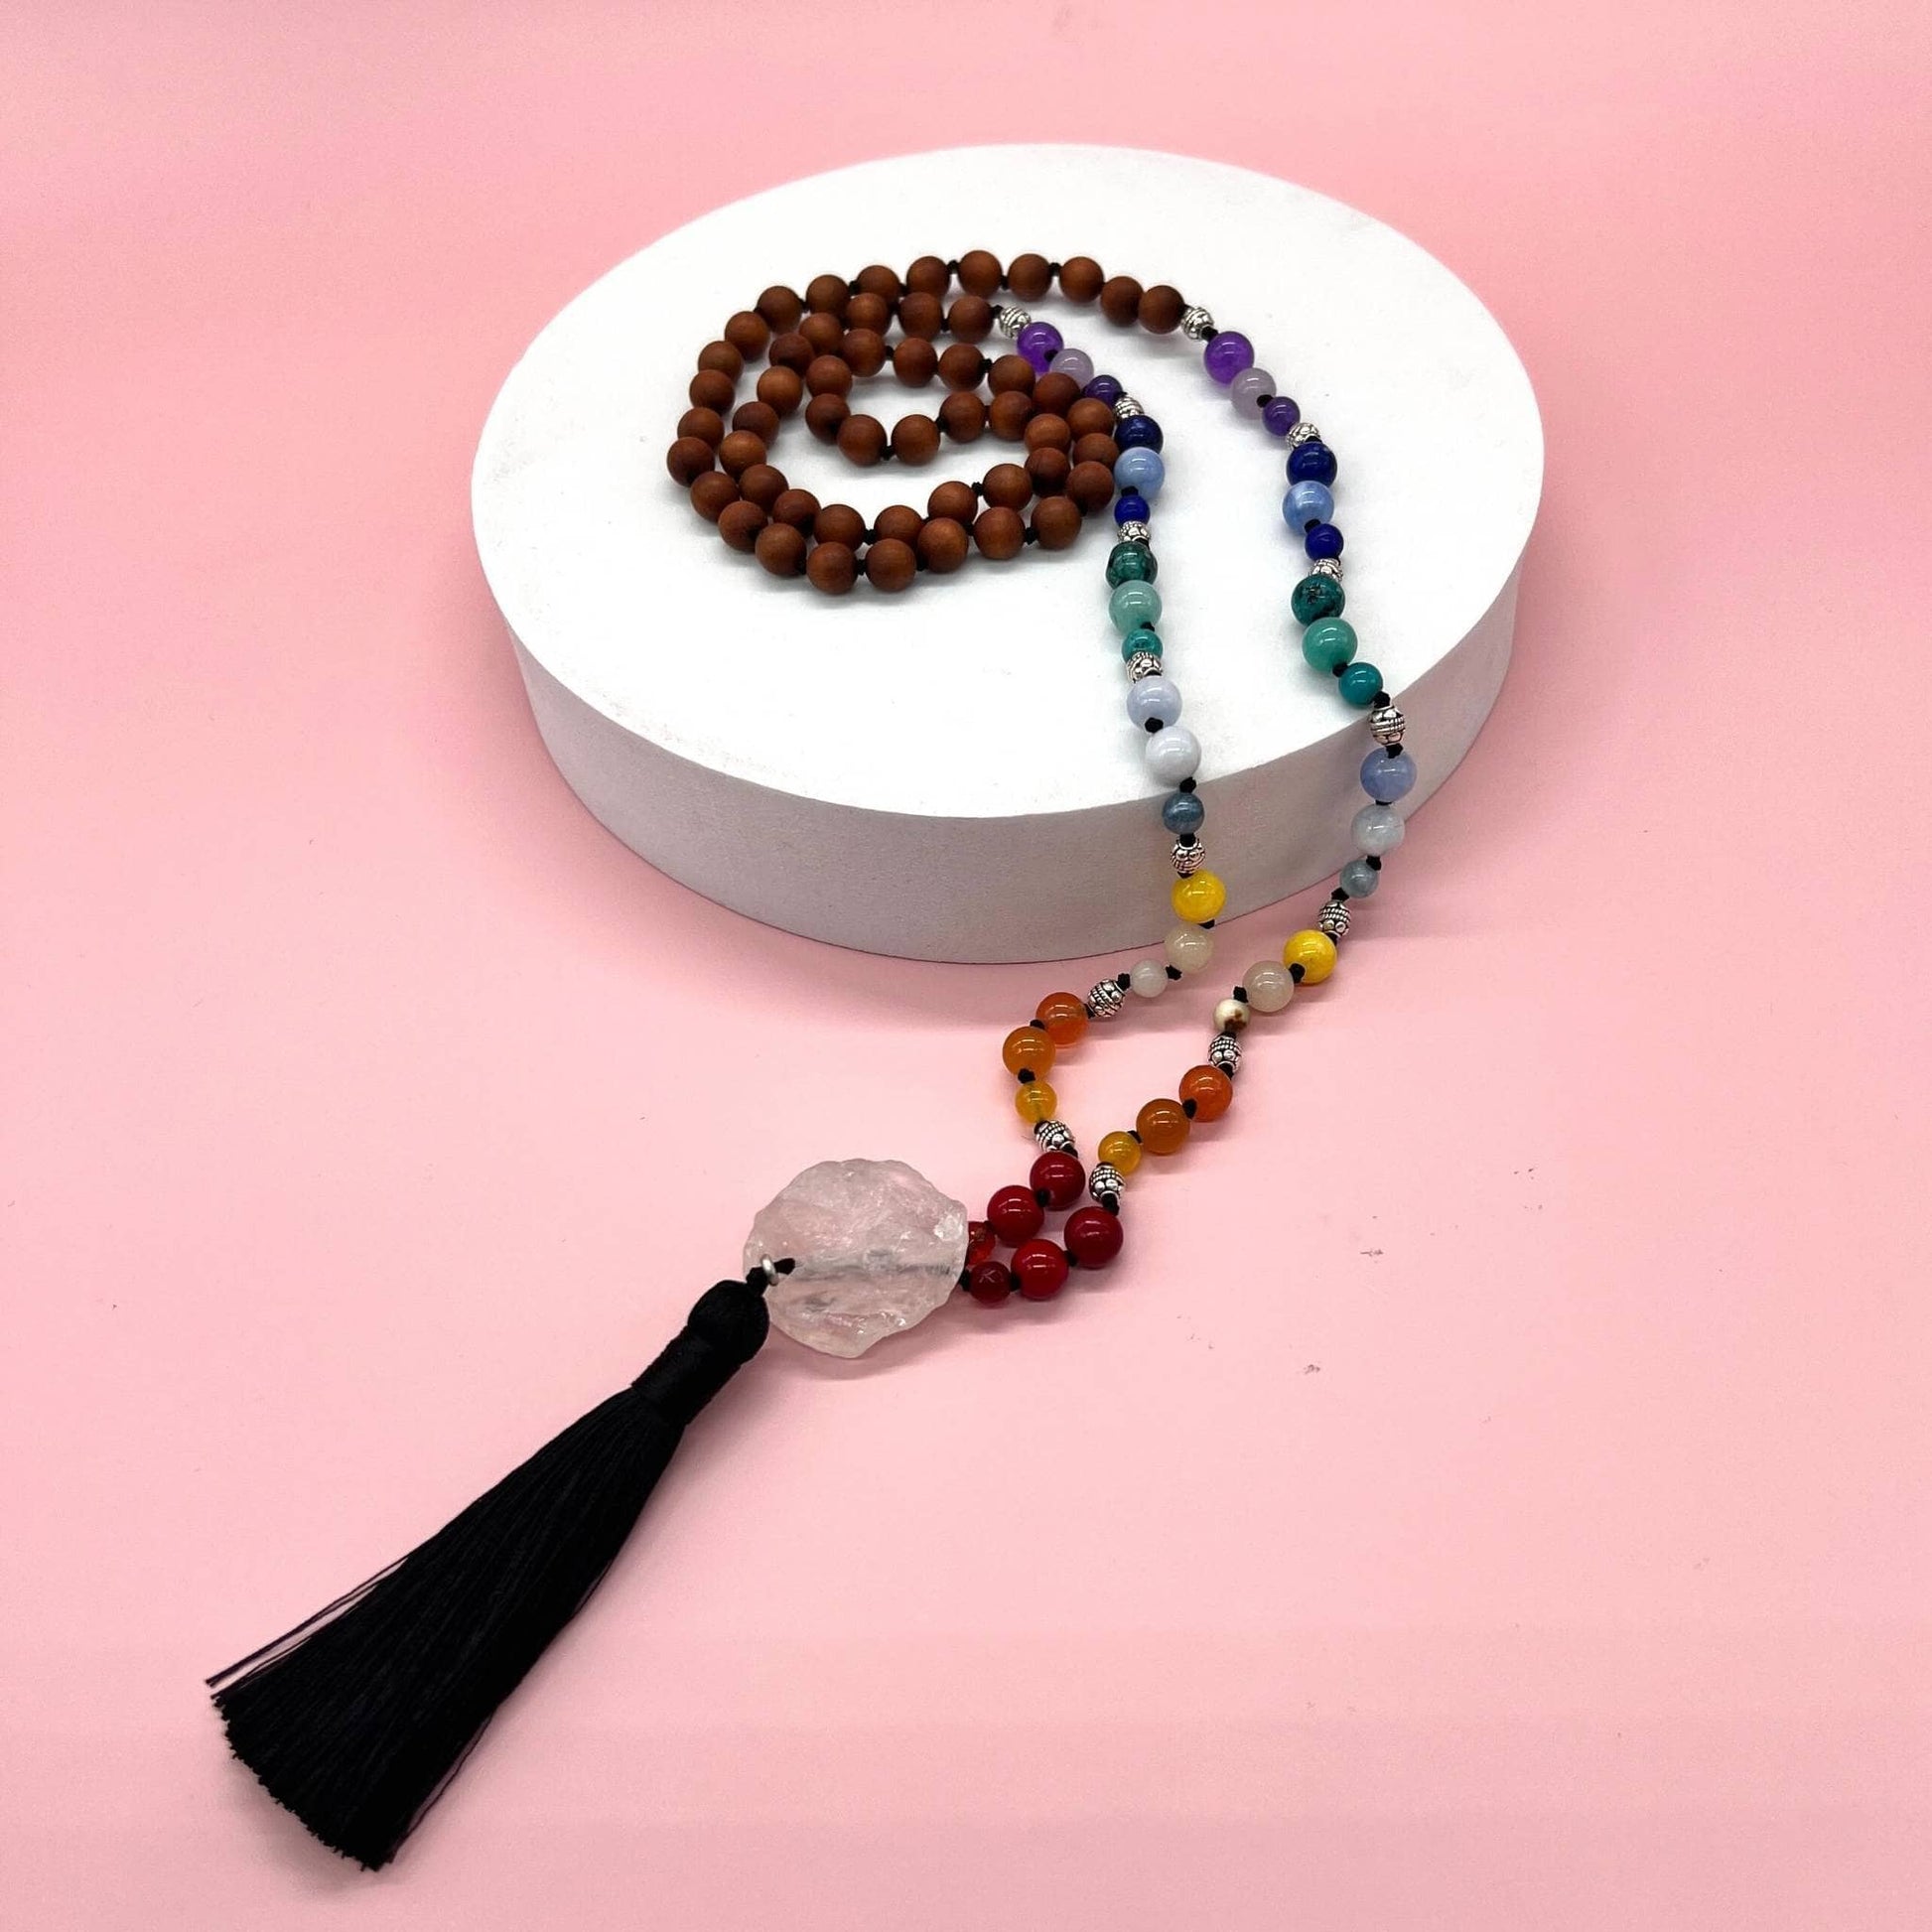 Chakra & Sandalwood Beaded Necklace is laying on a white flat cylinder on a pink backdrop.